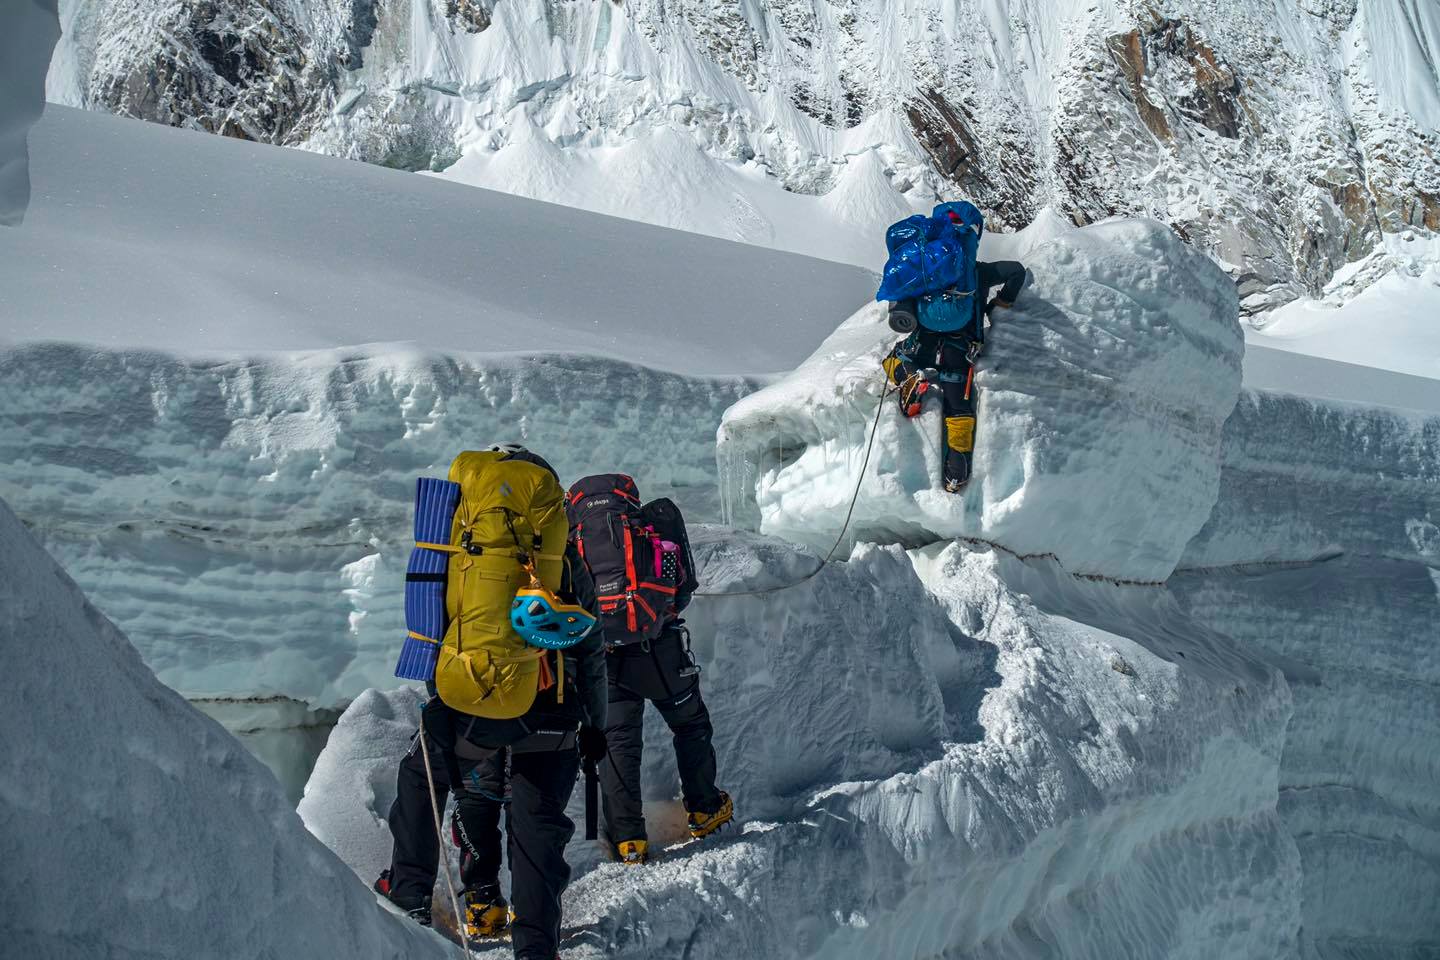 Everest climbing season extended to June 3, in a rare event, as scores